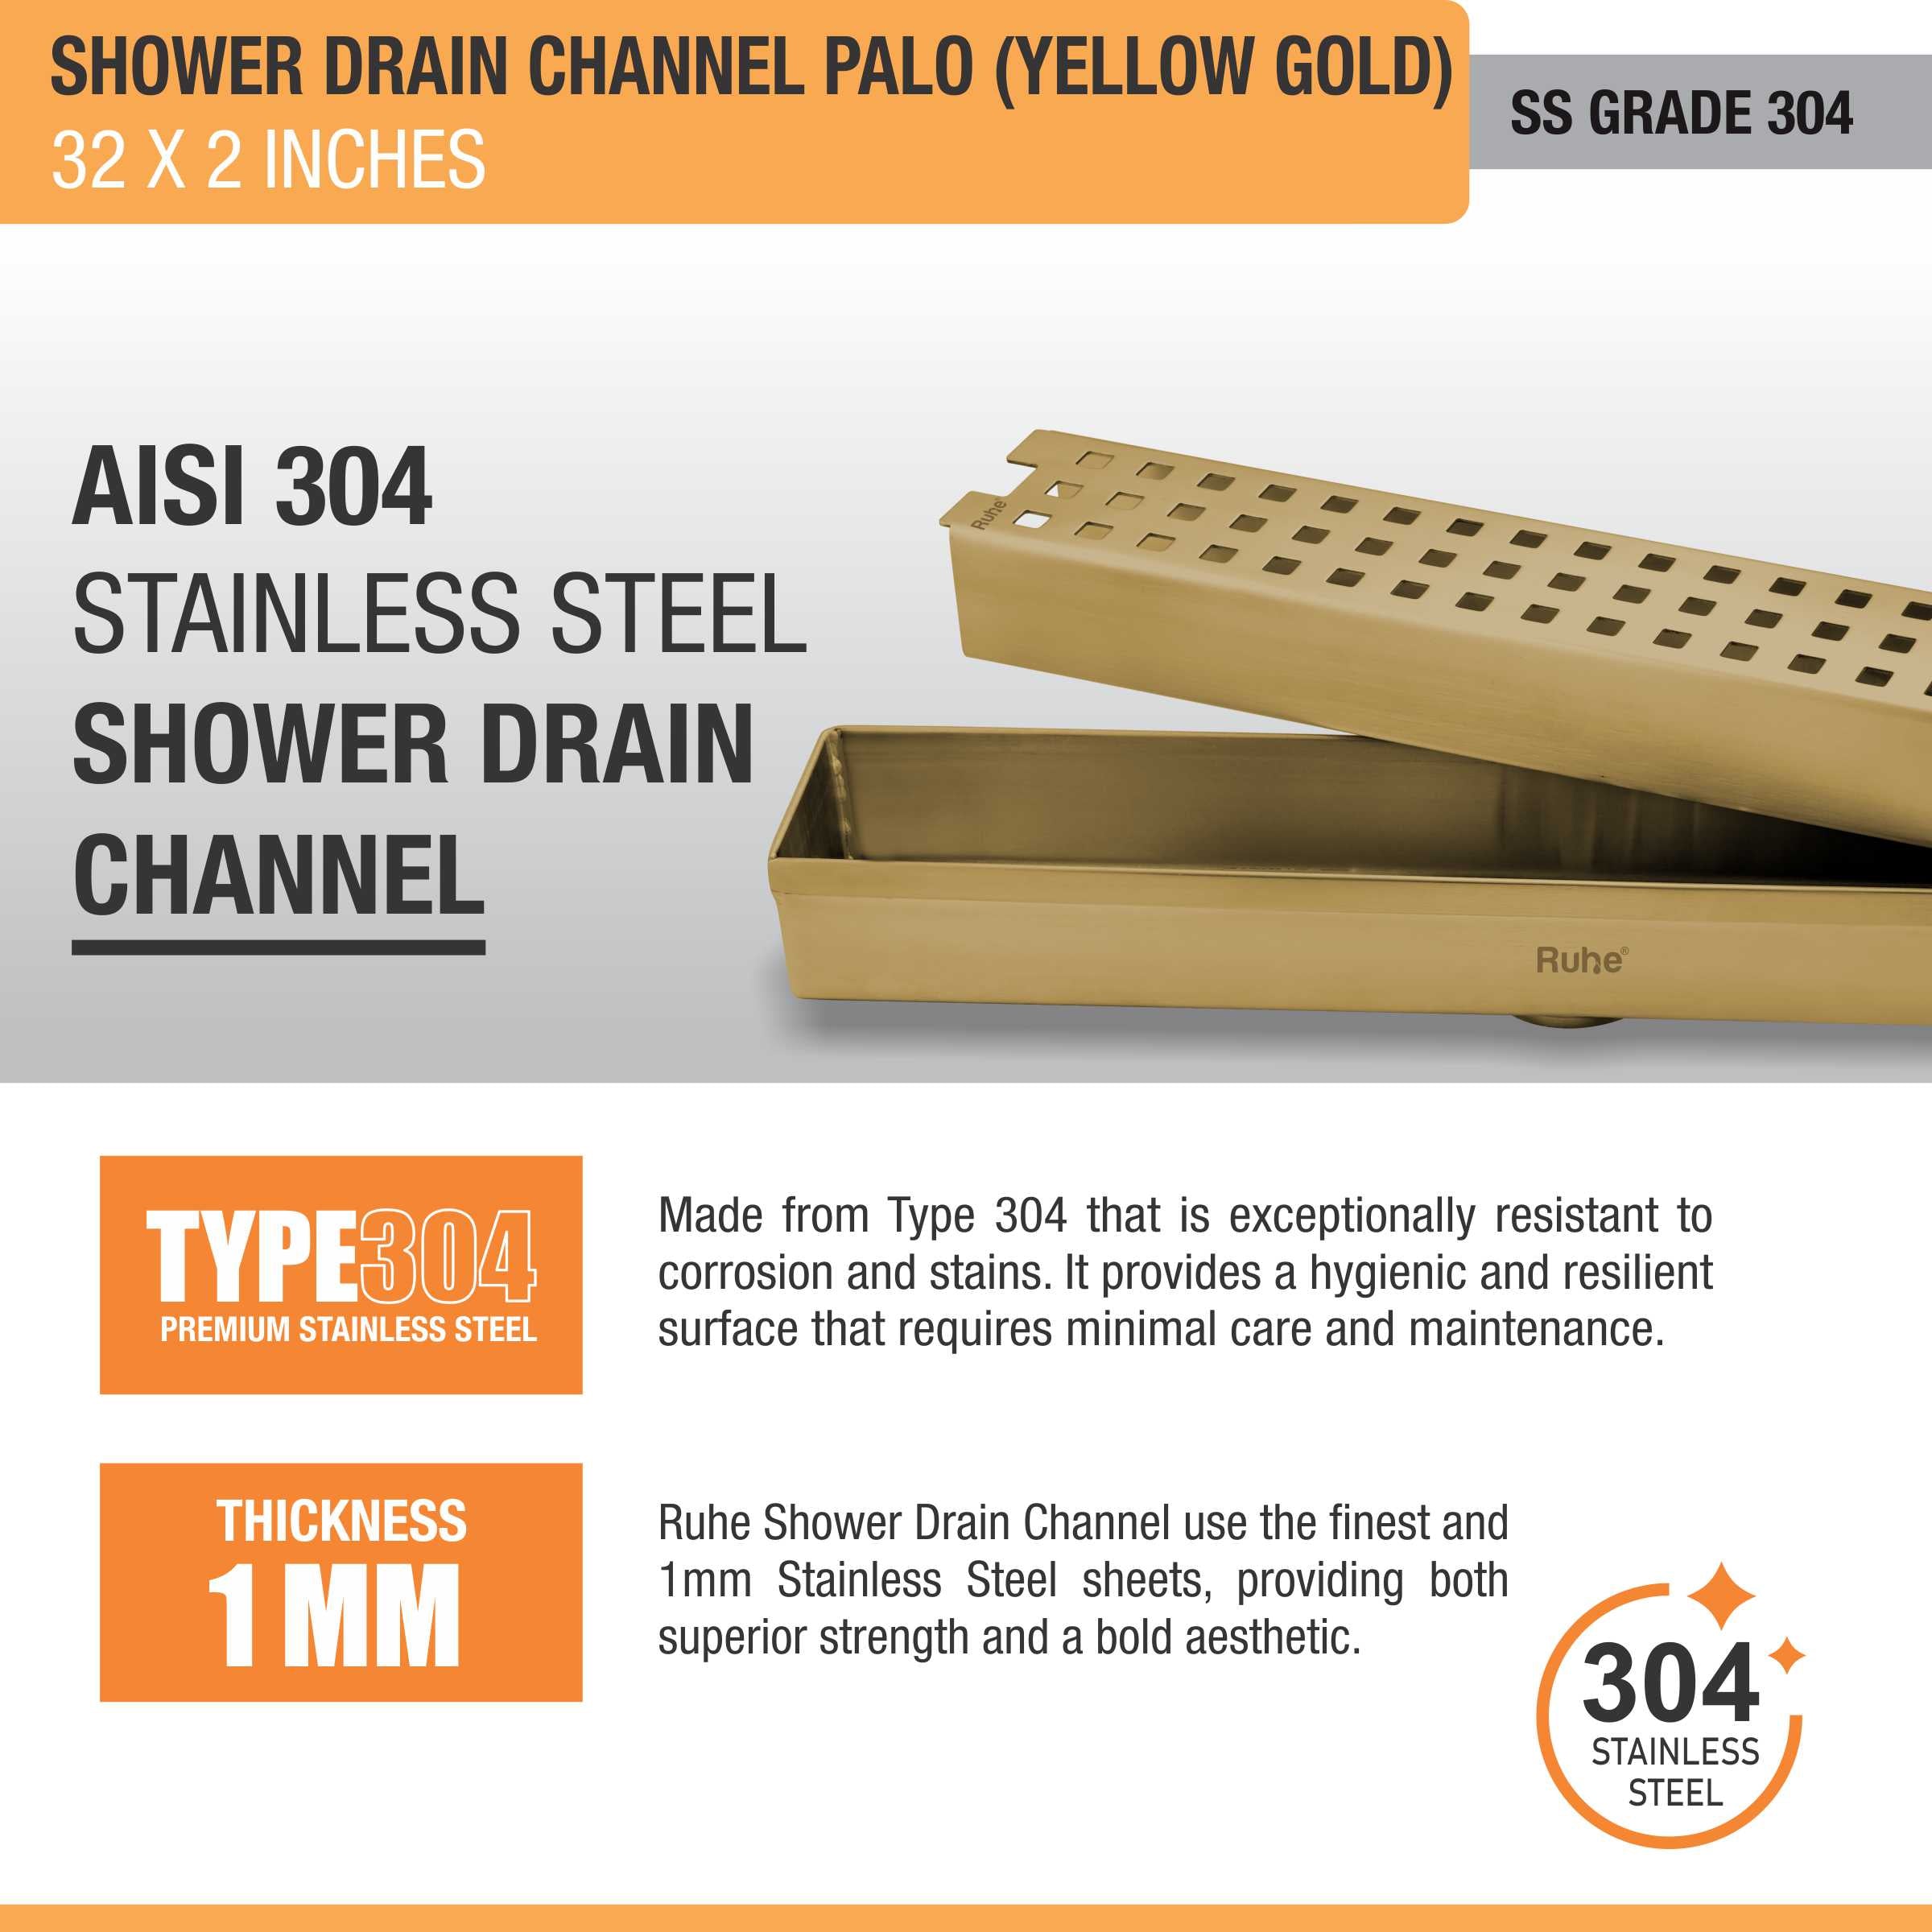 Palo Shower Drain Channel (32 x 2 Inches) YELLOW GOLD stainless steel